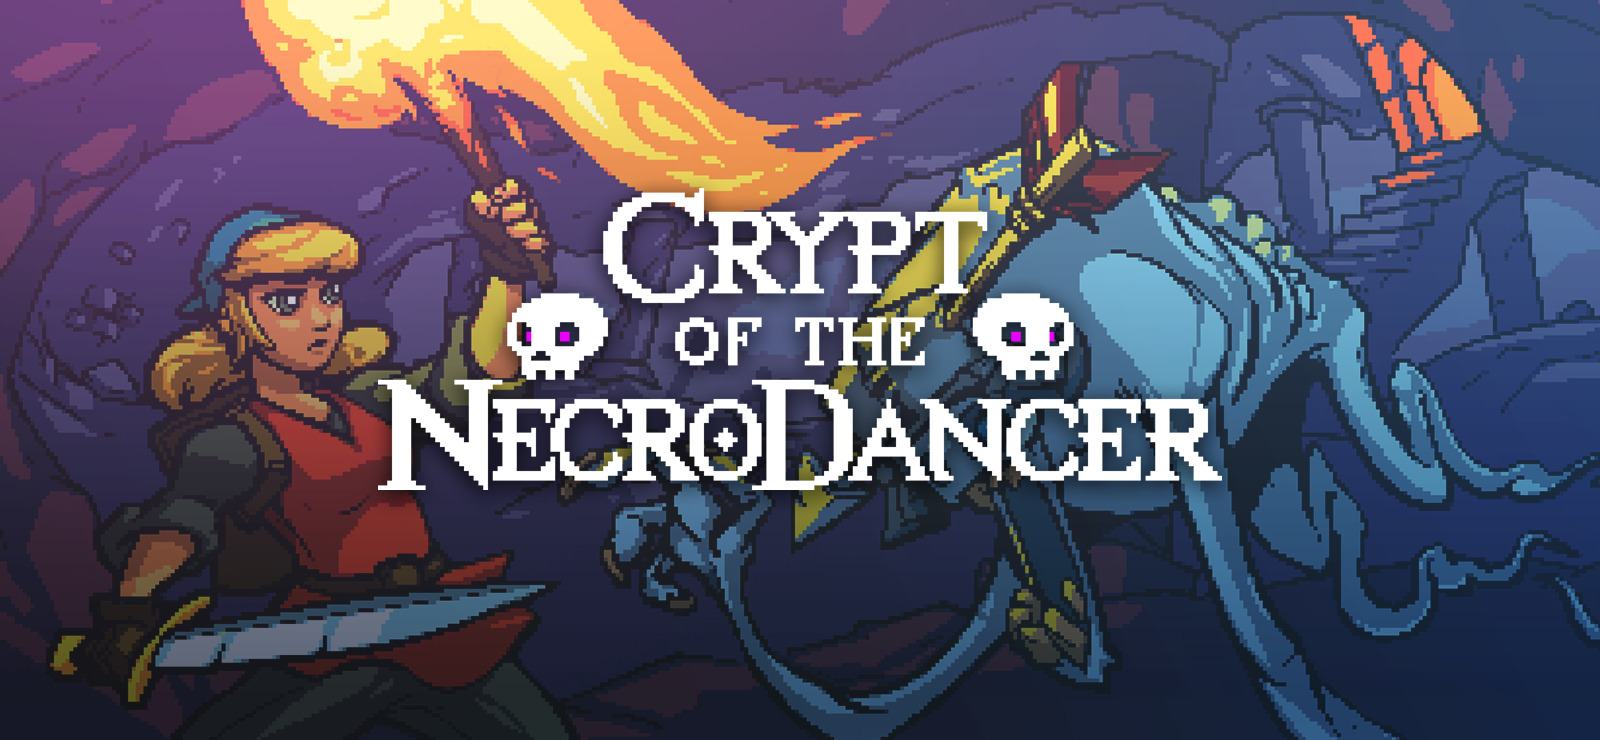 free download crypt of the necrodancer hyrule